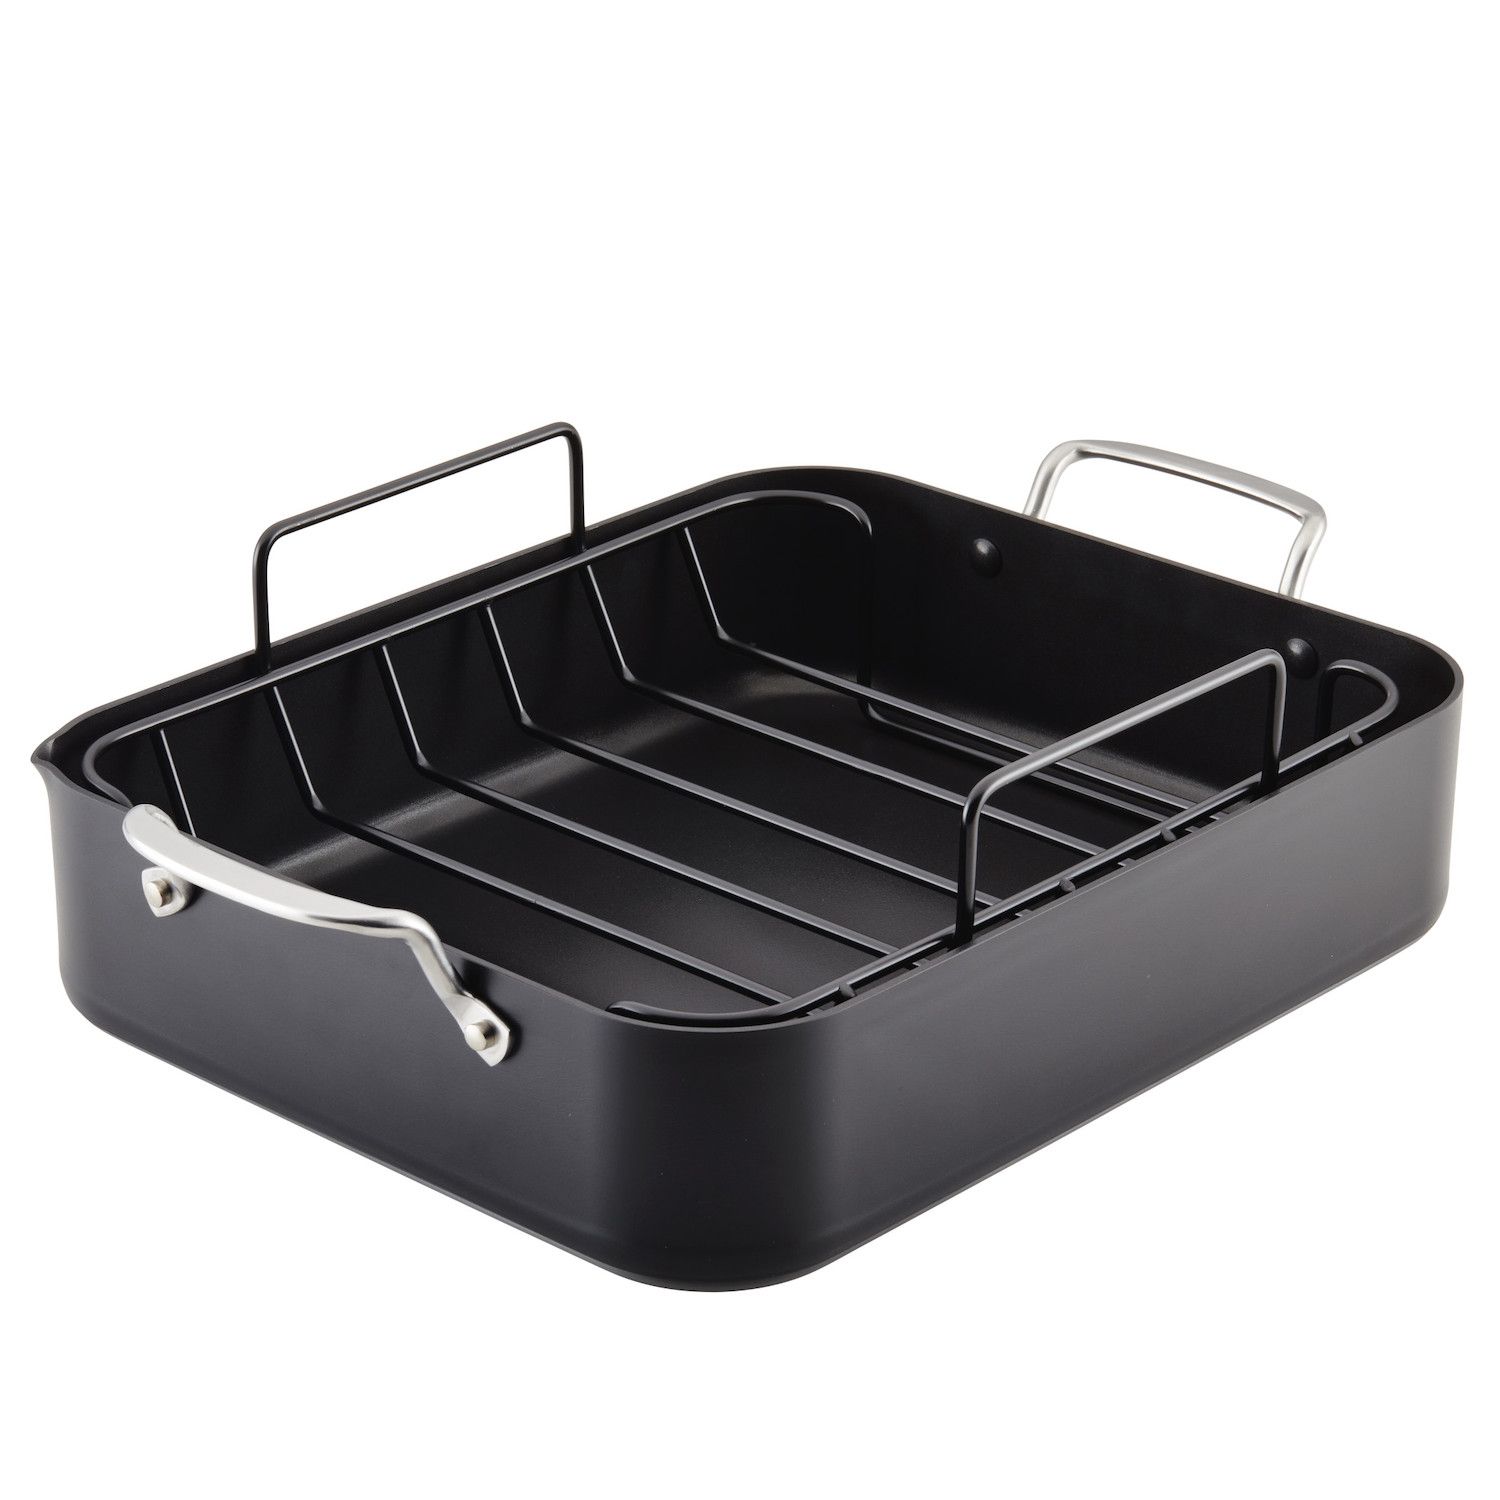 Baker's Secret Nonstick Carbon Steel Covered Roaster Pan with Lid - 13 x 9 x 2 in